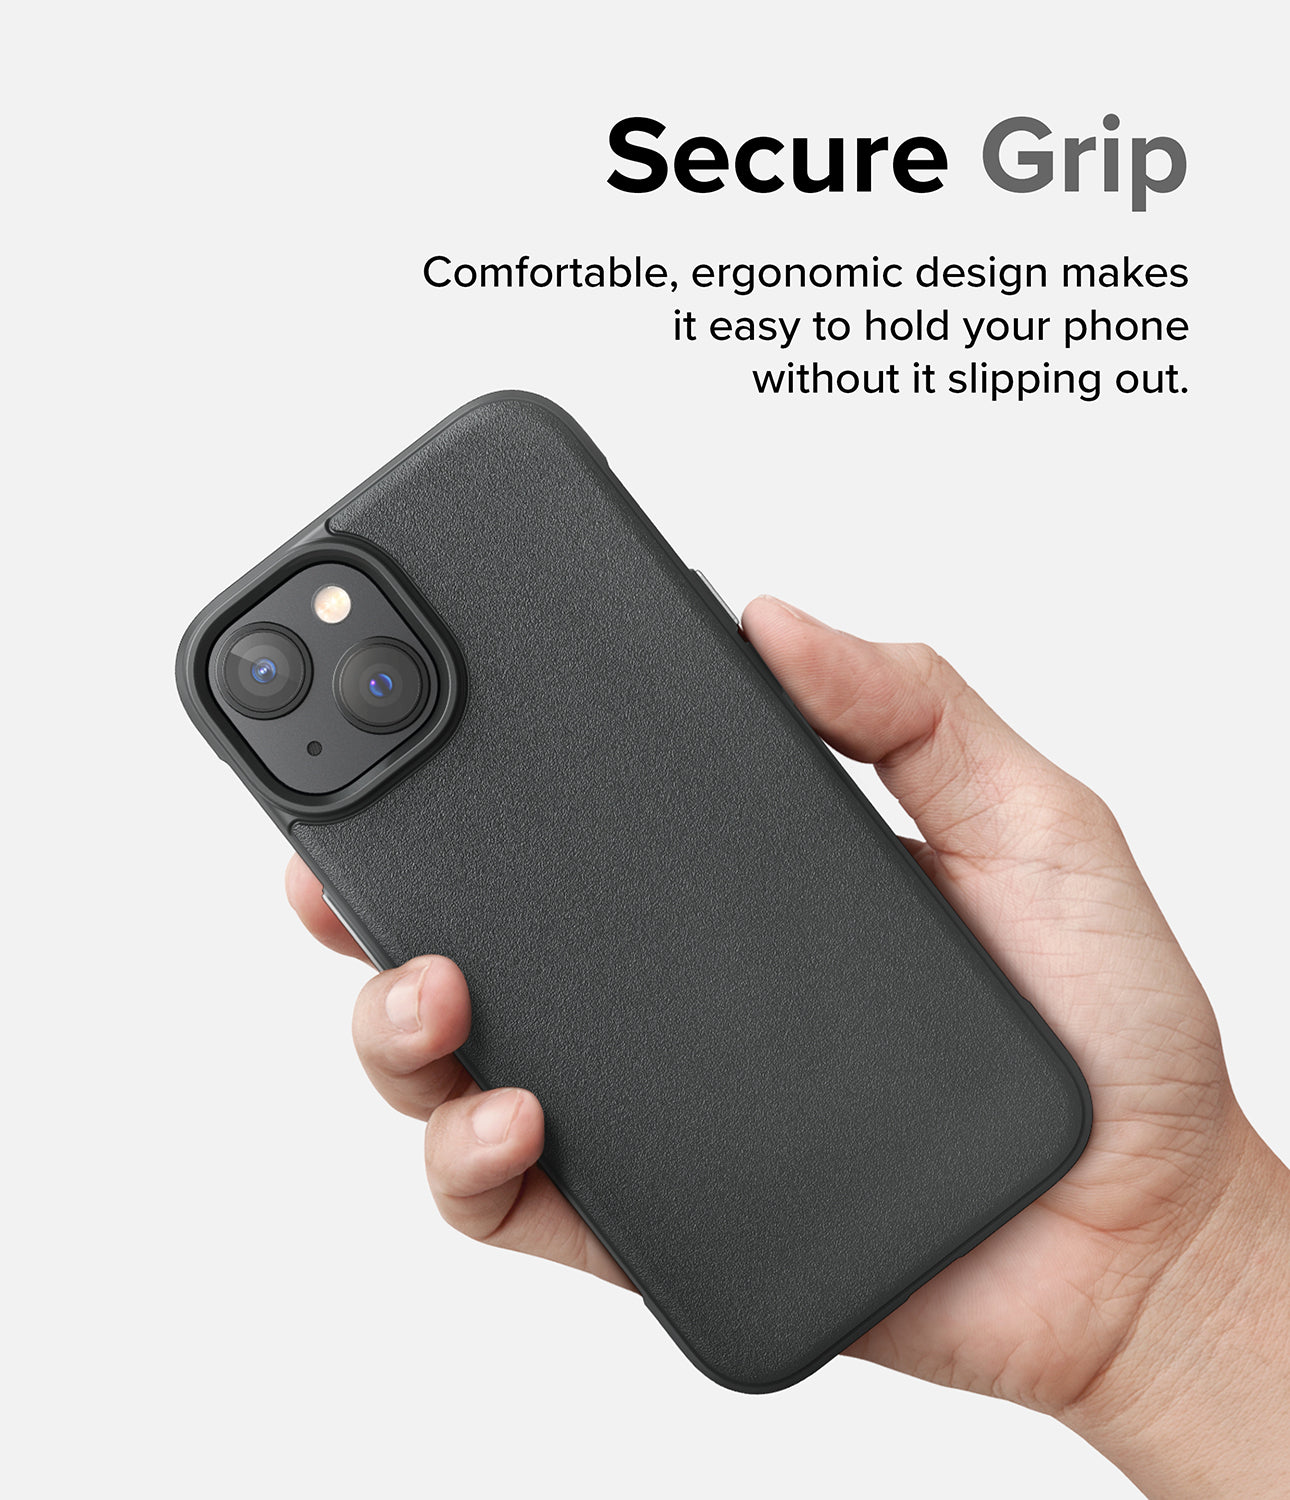 iPhone 14 Case | Onyx - Dark Gray - Secure Grip. Comfortable, ergonomic design makes it easy to hold your phone without it slipping out.